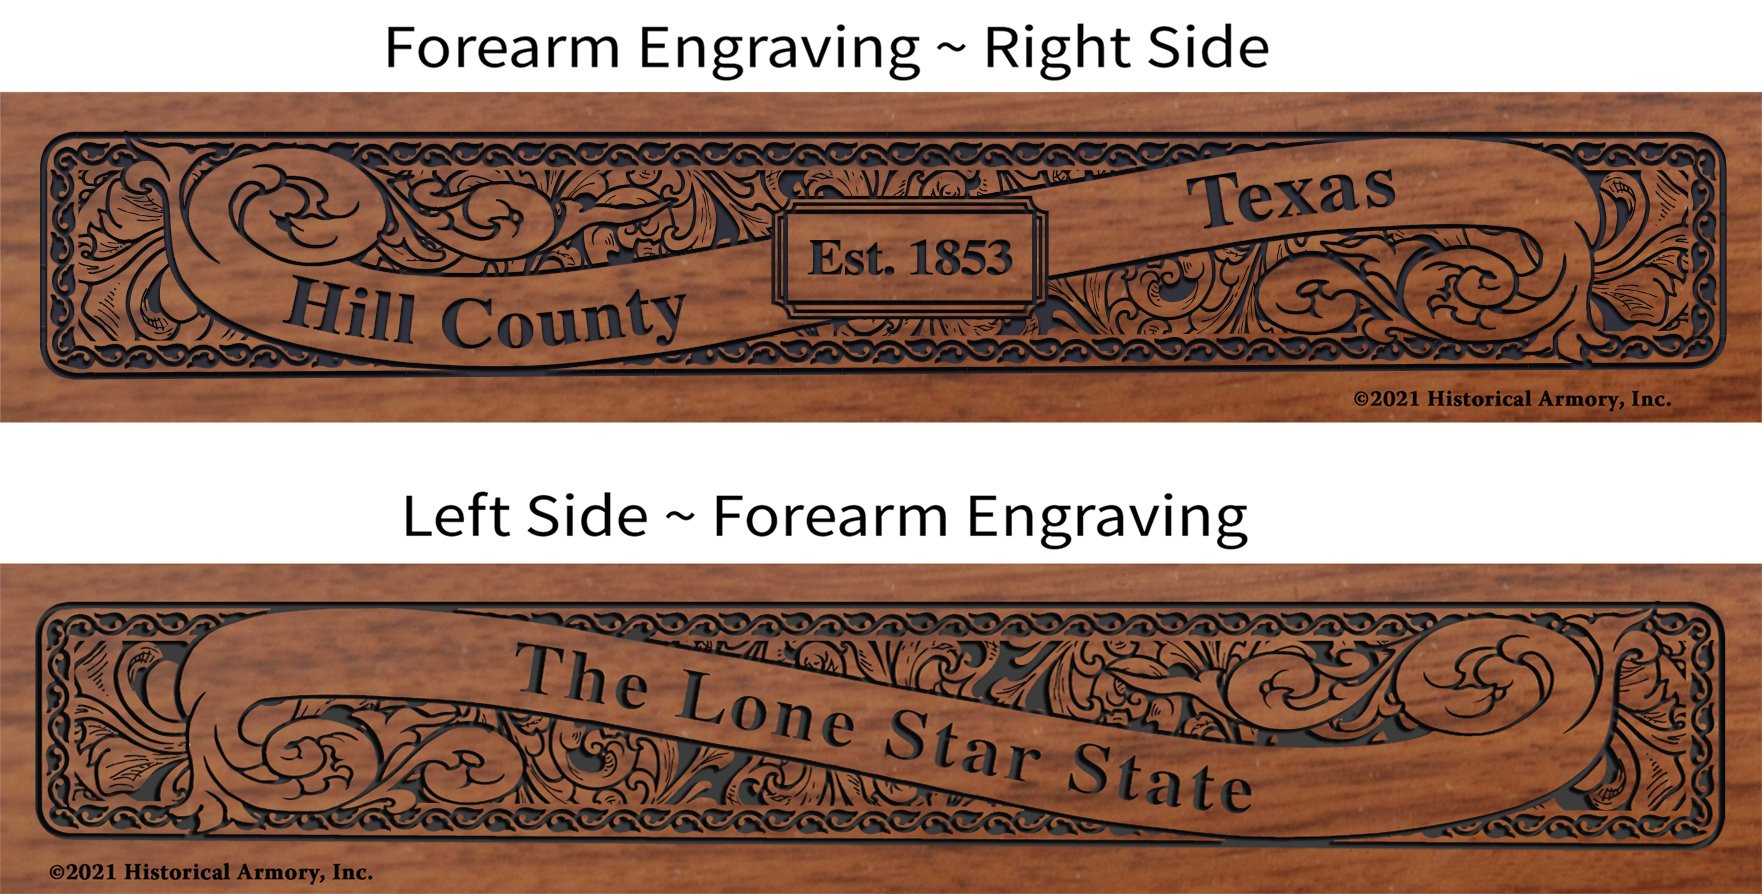 Hill County Texas Establishment and Motto History Engraved Rifle Forearm